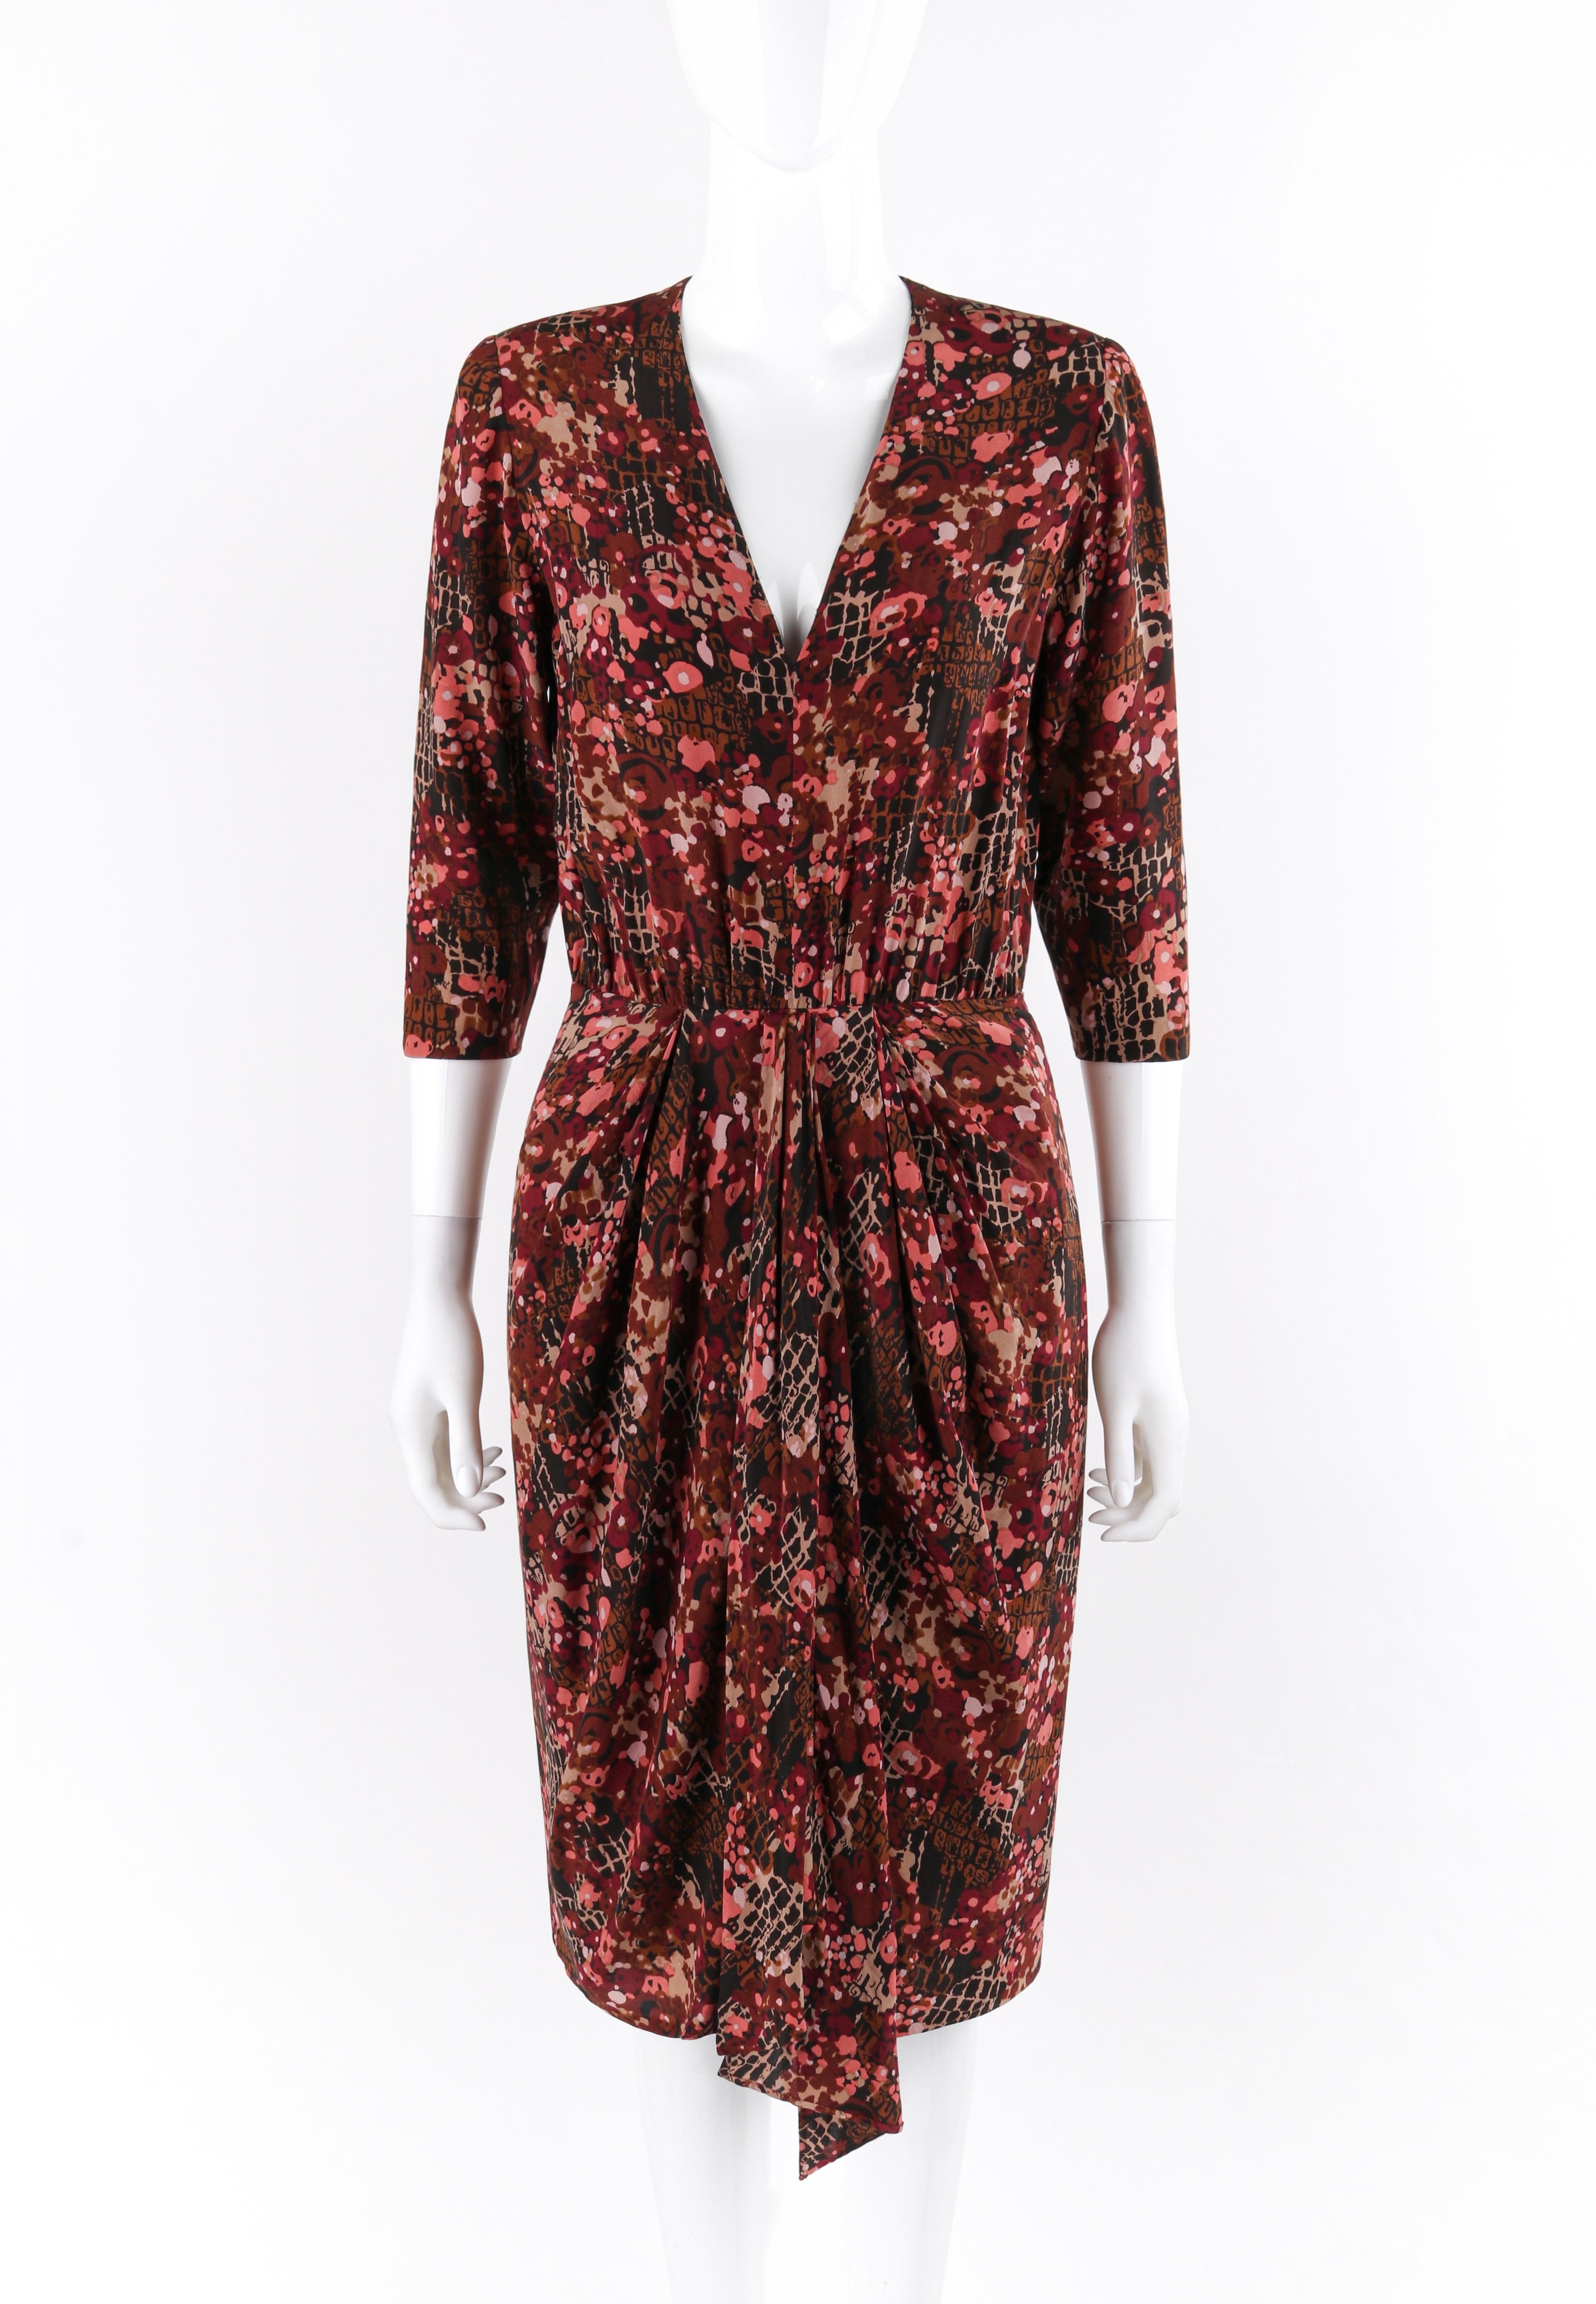 GIVENCHY c.1970’s Haute Couture Pink Brown Silk Floral Print Sheath Dress Numbered

Circa: 1970’s
Label(s): Givenchy
Designer: Hubert de Givenchy / #57.750
Style: Sheath dress
Color(s): Shades of pink, burgundy, gray, and brown
Lined: Partial-